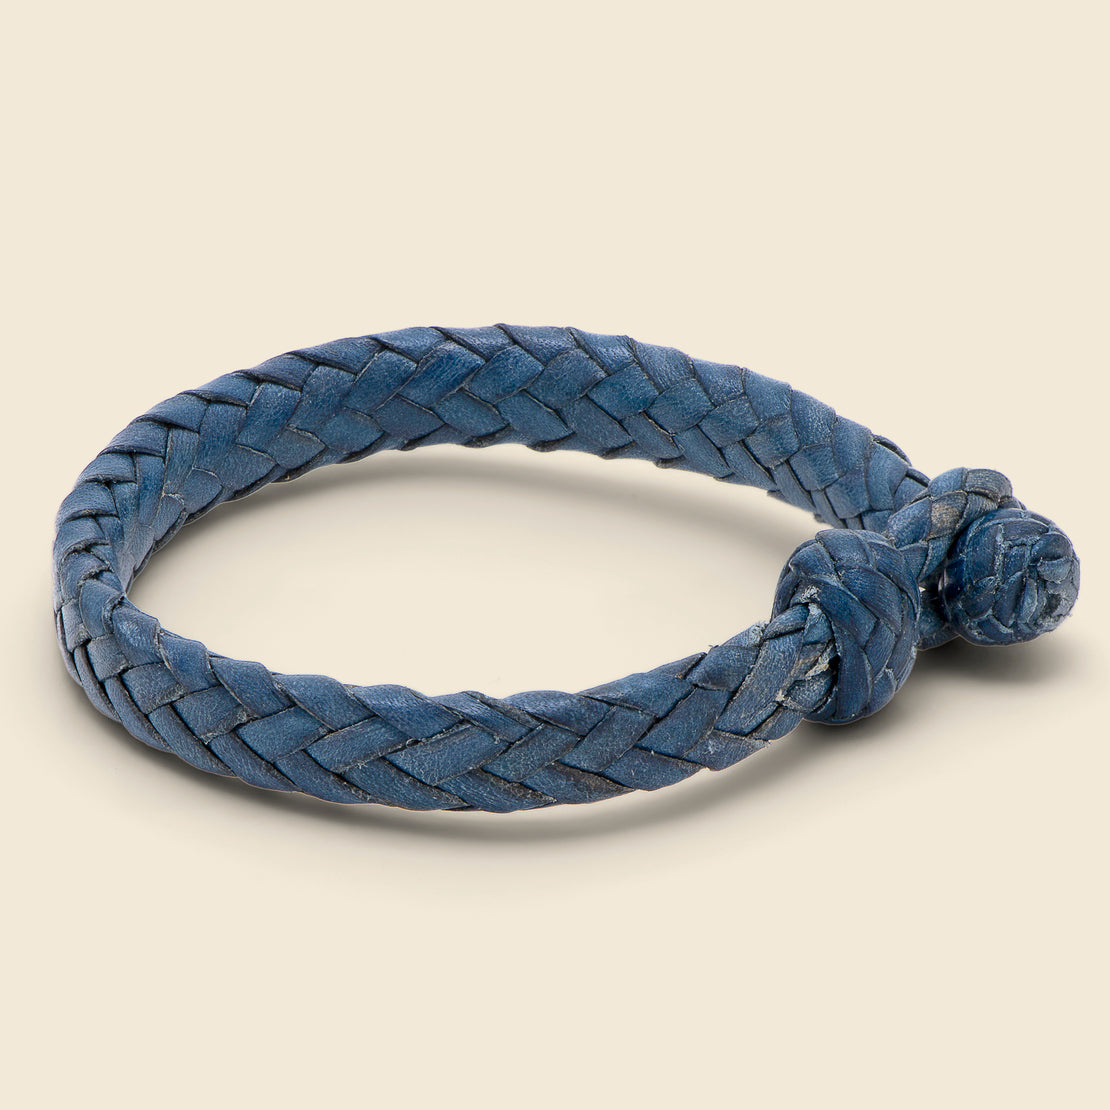 Flat Woven Leather Bracelet - Blue - Chamula - STAG Provisions - Accessories - Cuffs